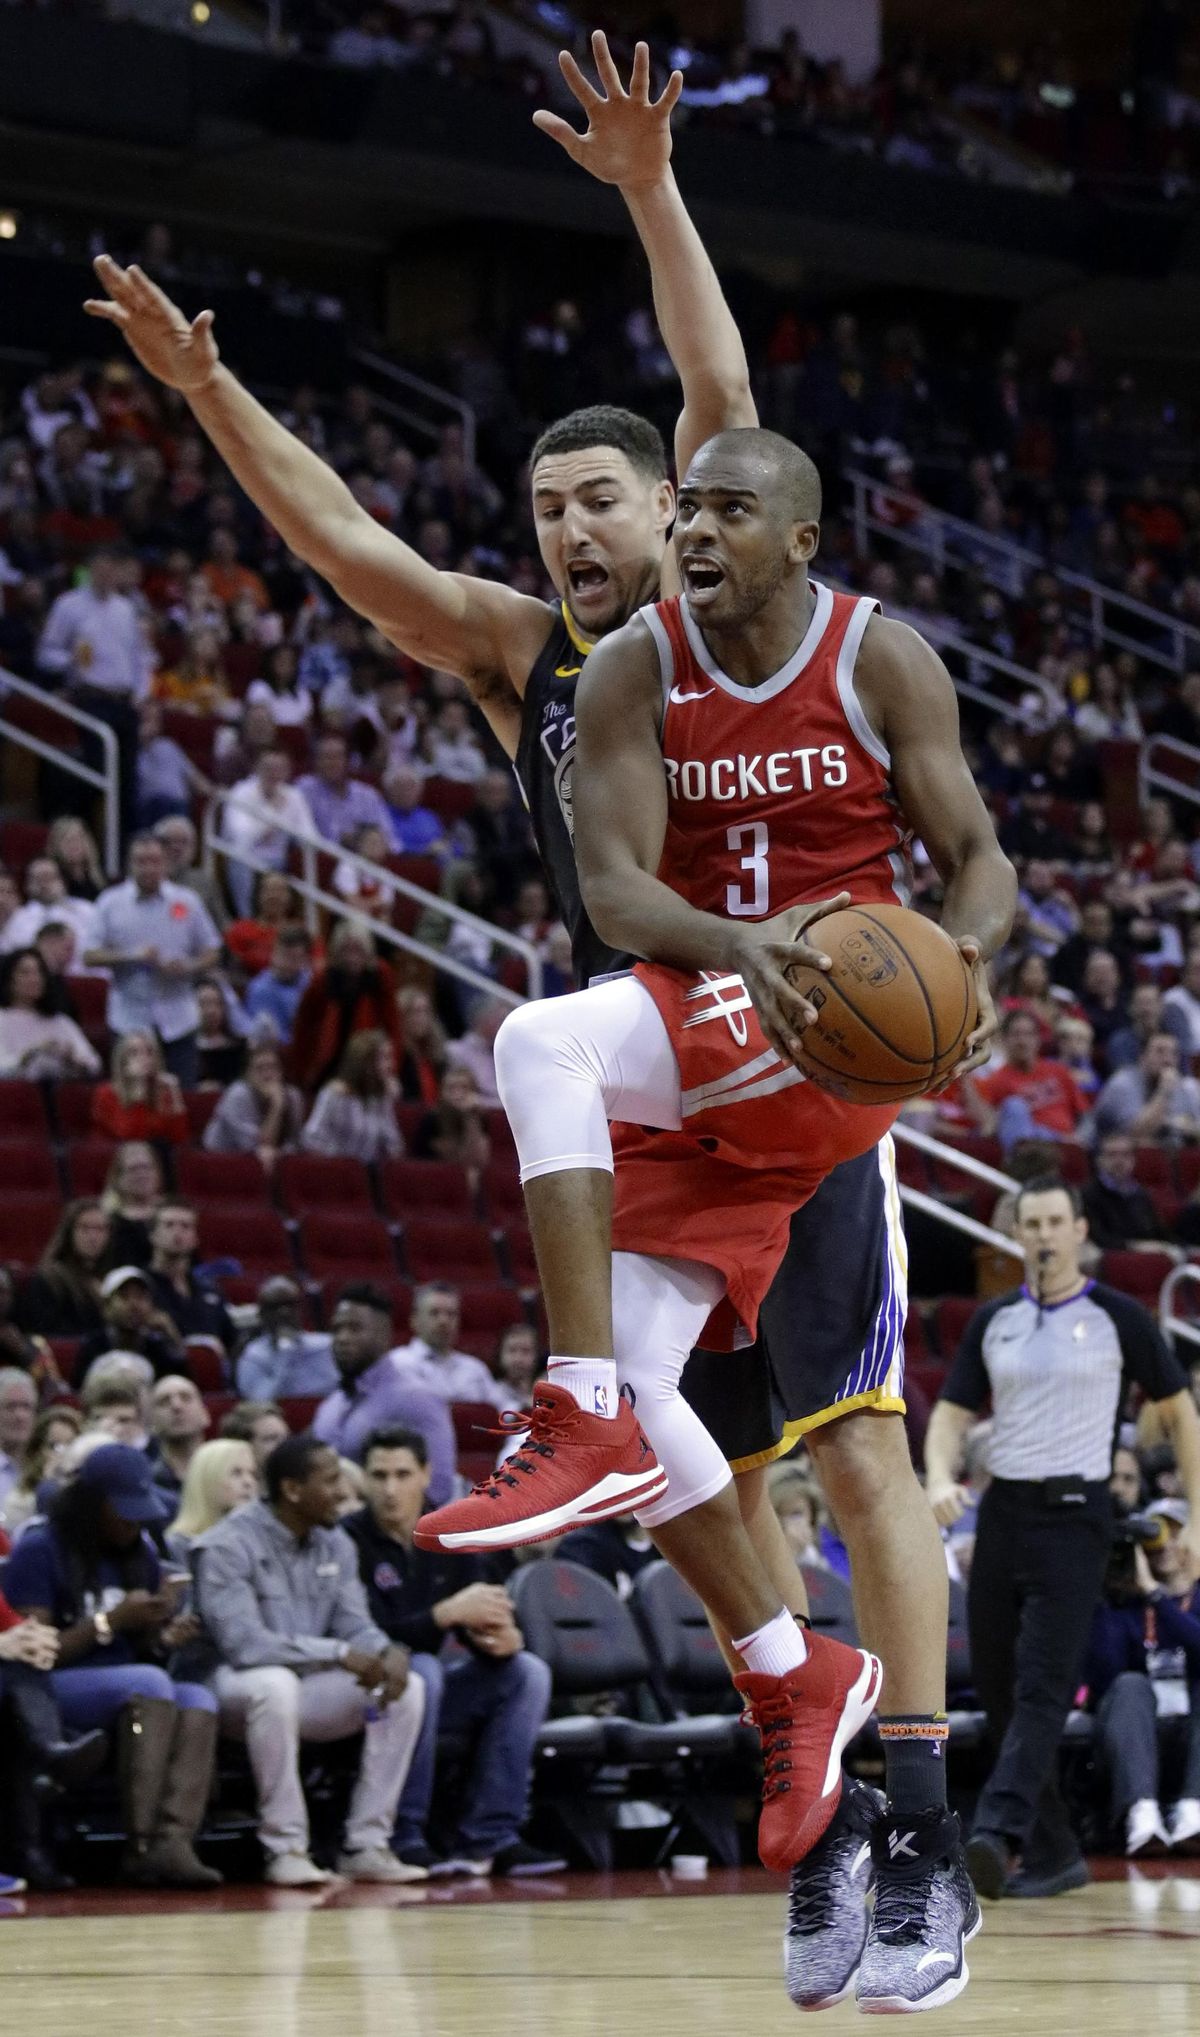 In this Jan. 20, 2018, file photo, Houston Rockets guard Chris Paul (3) shoots in front of Golden State Warriors guard Klay Thompson (11) during the second half of an NBA basketball game, in Houston. The buildup to this Golden State-Houston matchup in the Western Conference finals started in February, when Draymond Green had some pointed comments. Or in October, when the Rockets beat the Warriors on ring night. Or in June, when Chris Paul got traded. Whatever the case, the series that everyone in the NBA apparently wanted to see is about to happen. (Michael Wyke / Associated Press)